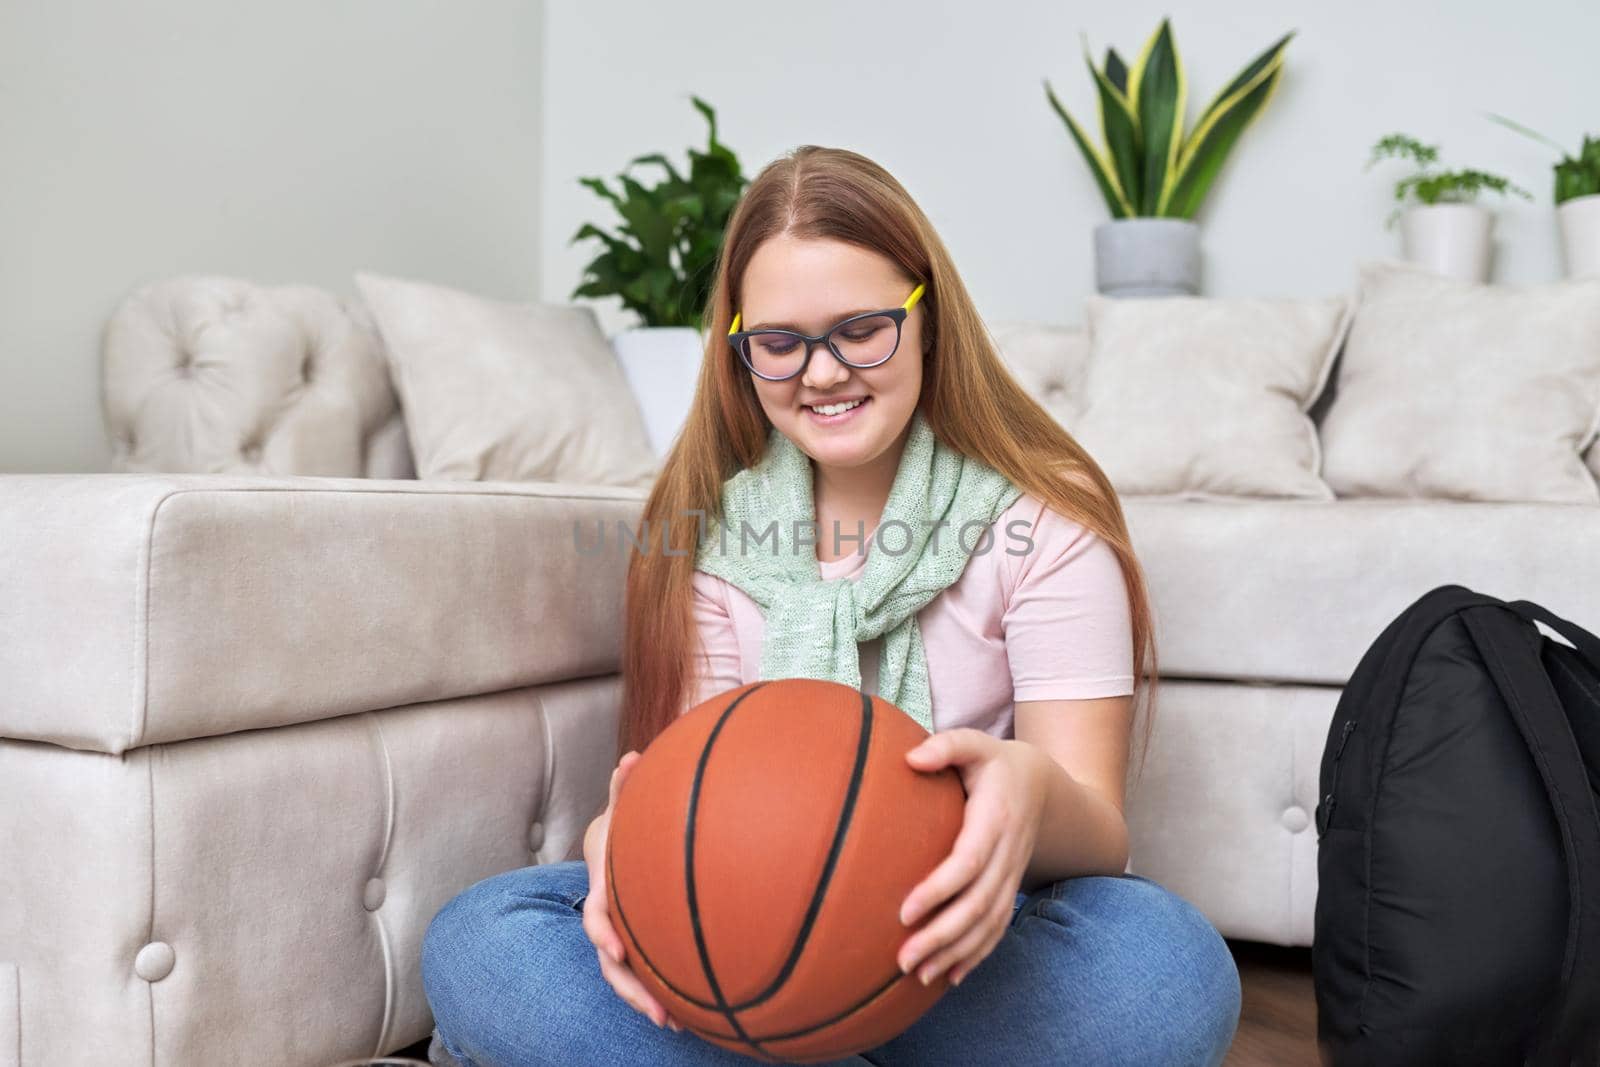 Happy smiling teenage girl with basketball ball in hands sitting on floor at home. Active healthy sports lifestyle for adolescents and teenagers